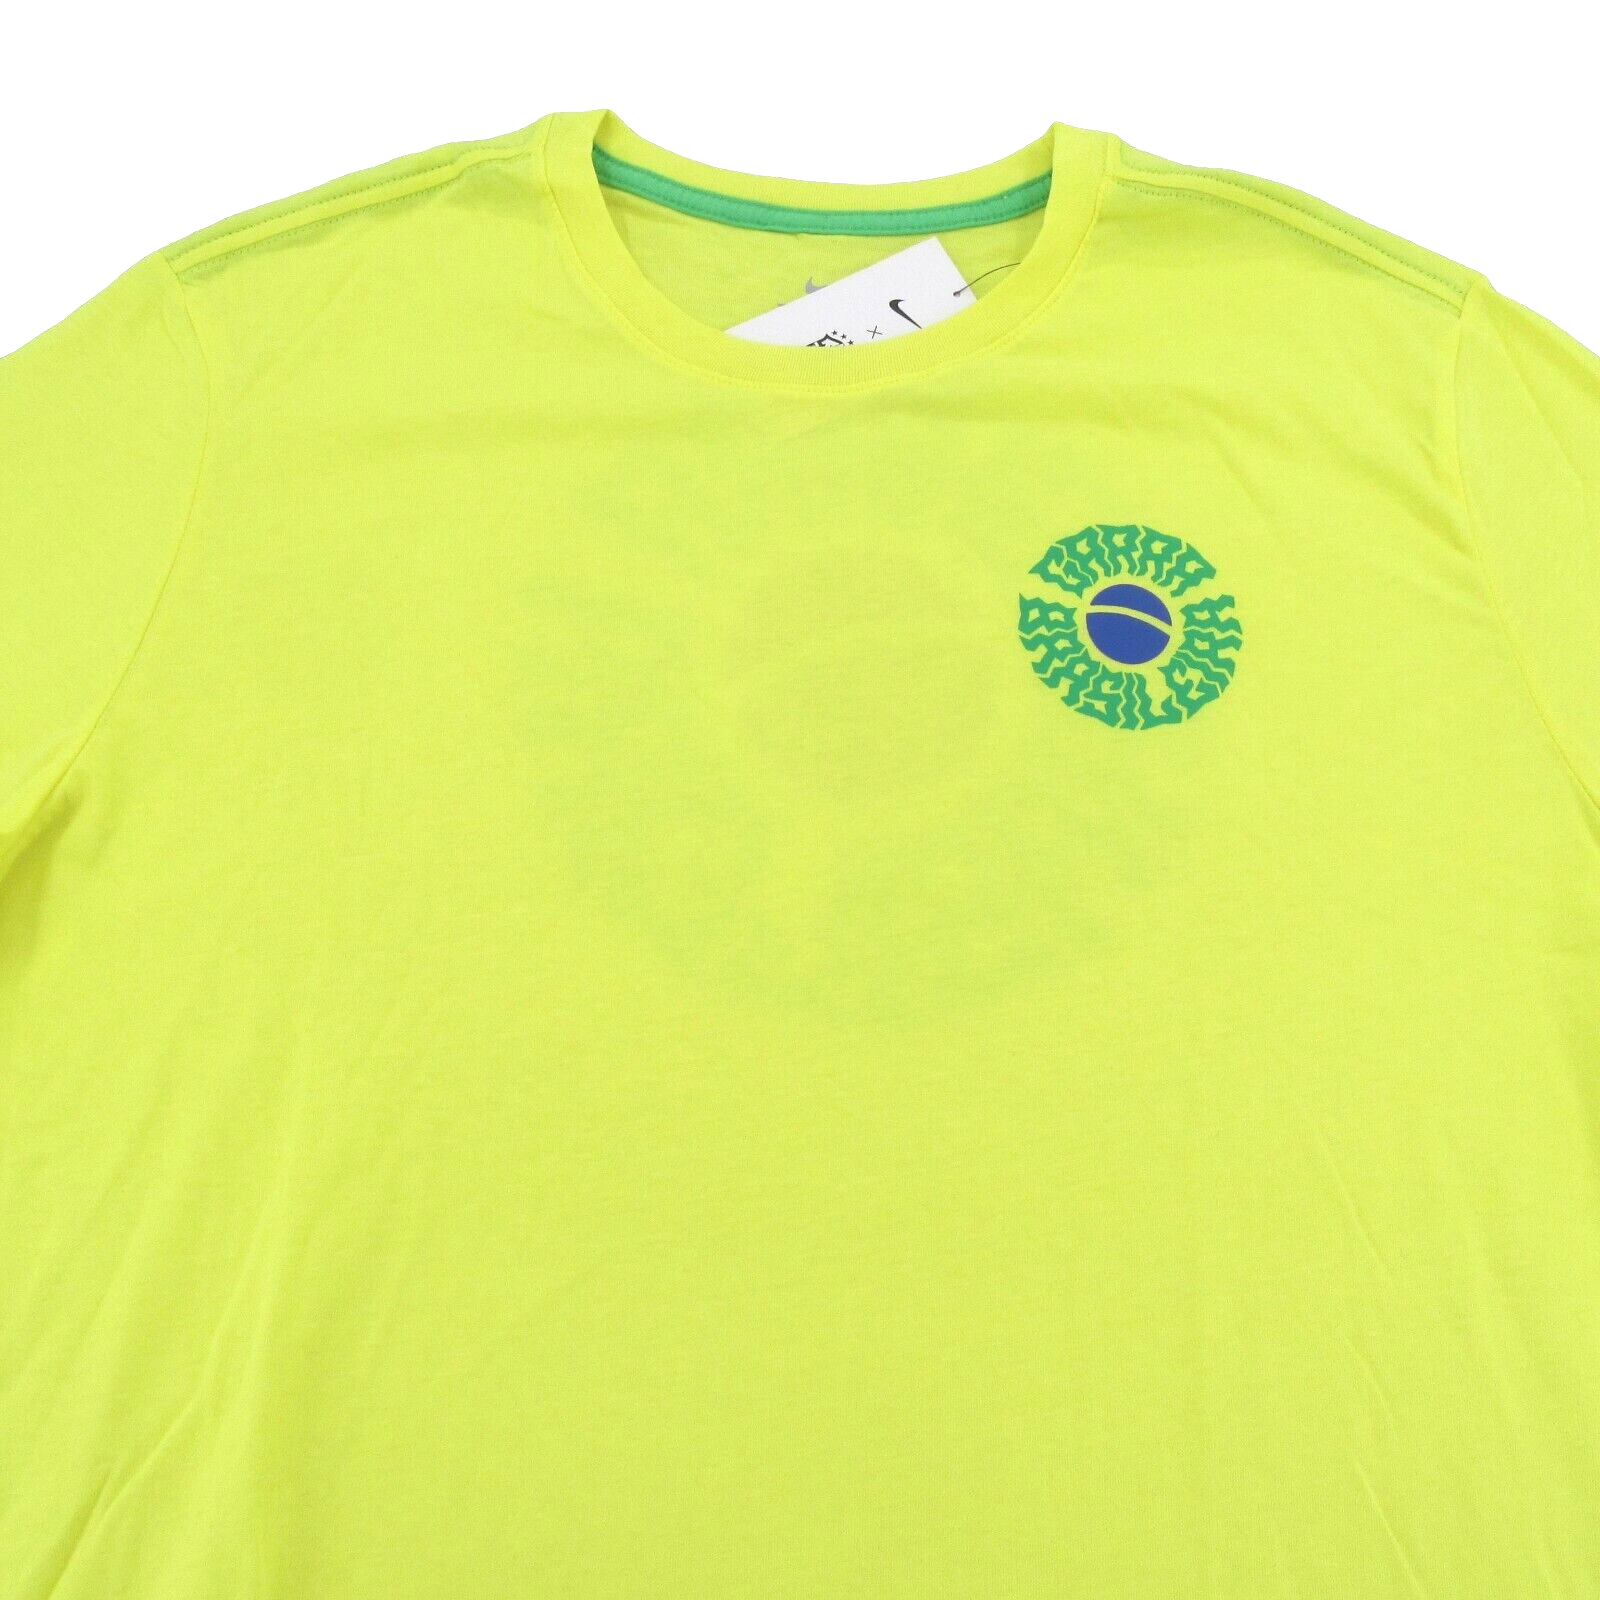 Primary image for Nike Brazil Voice Graphic T-Shirt Mens Size Large Dynamic Yellow NEW DH7662-740